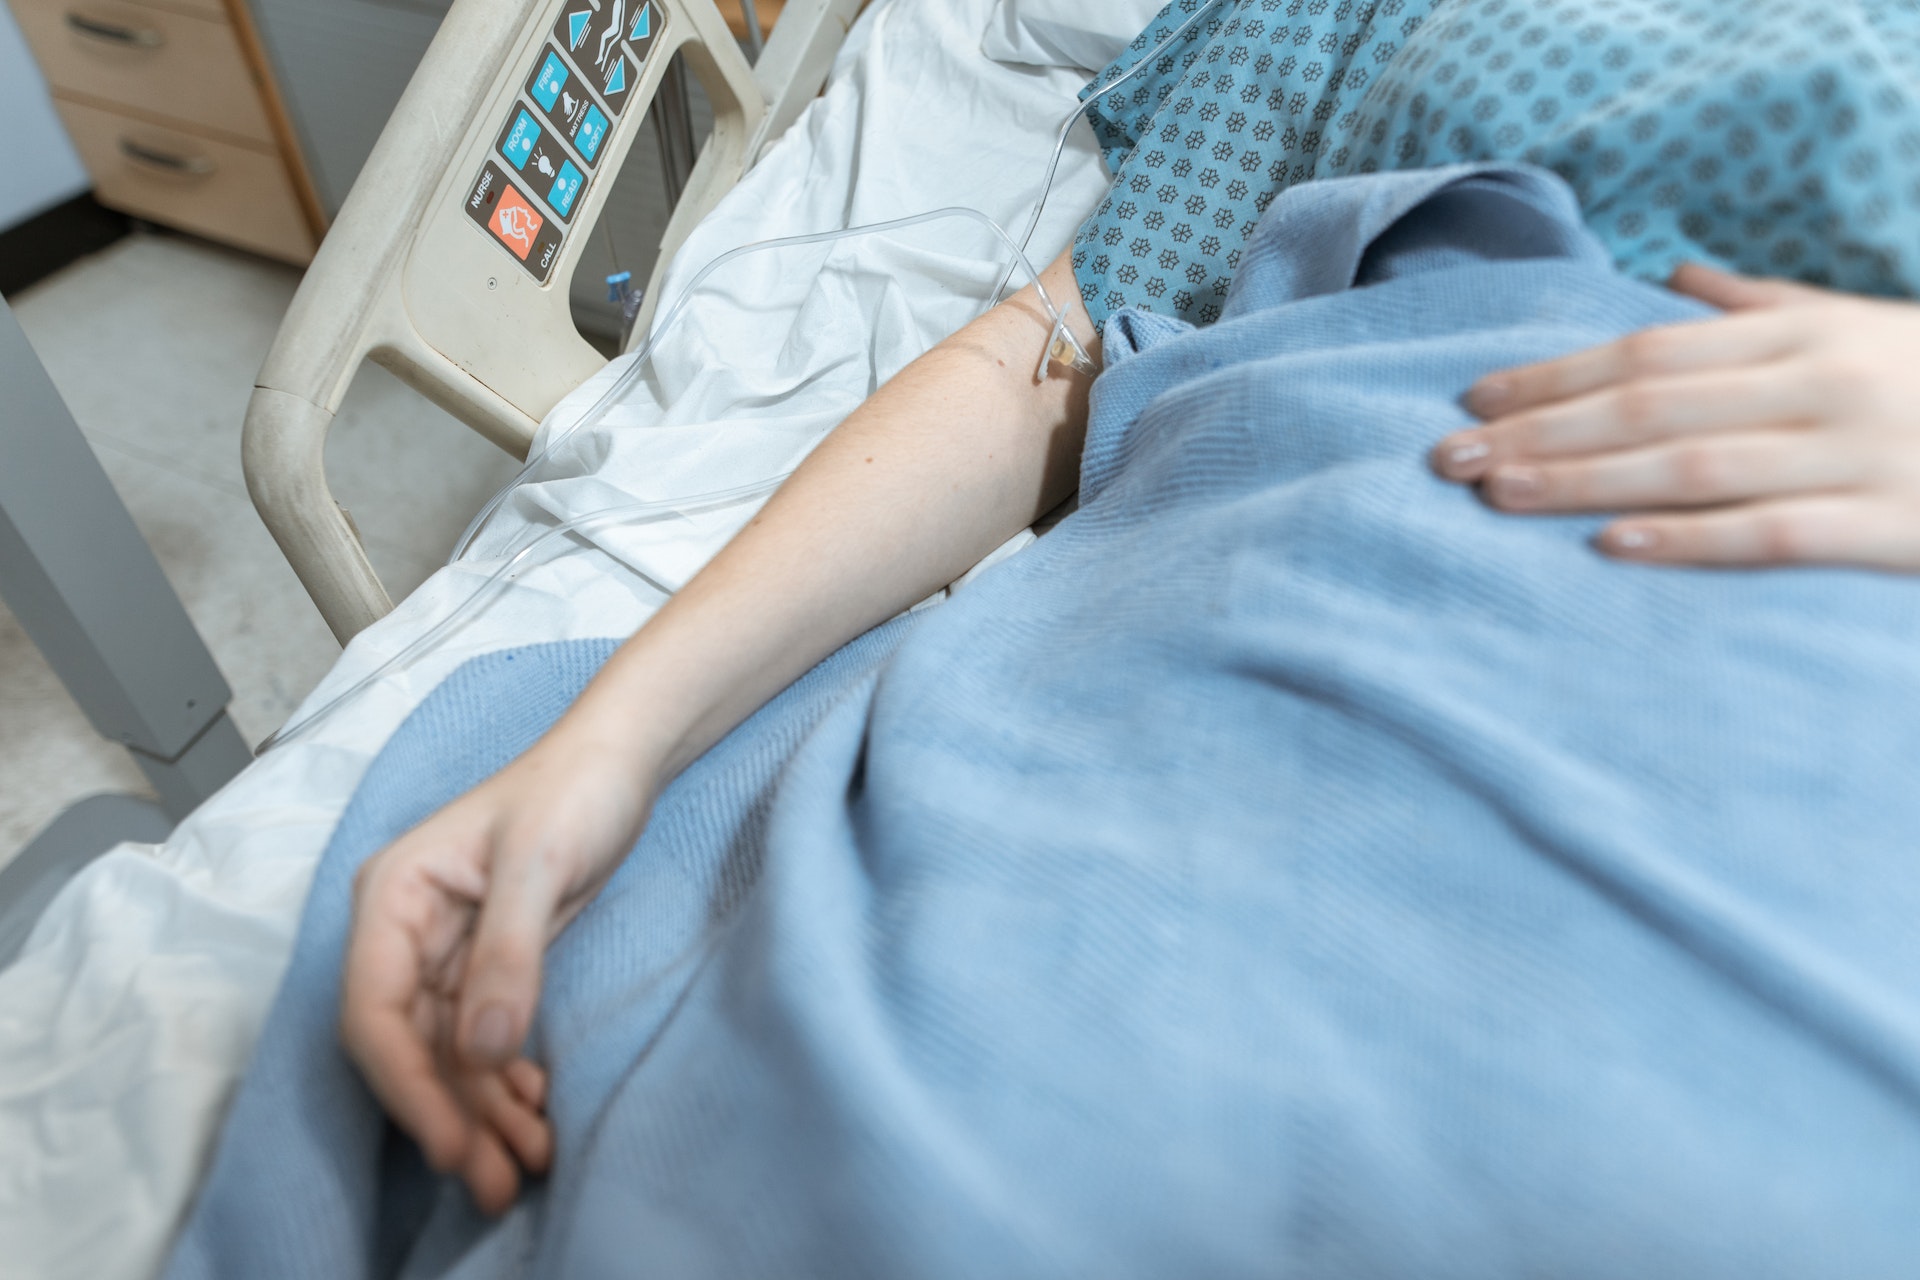 A person in a hospital bed | Source: Pexels